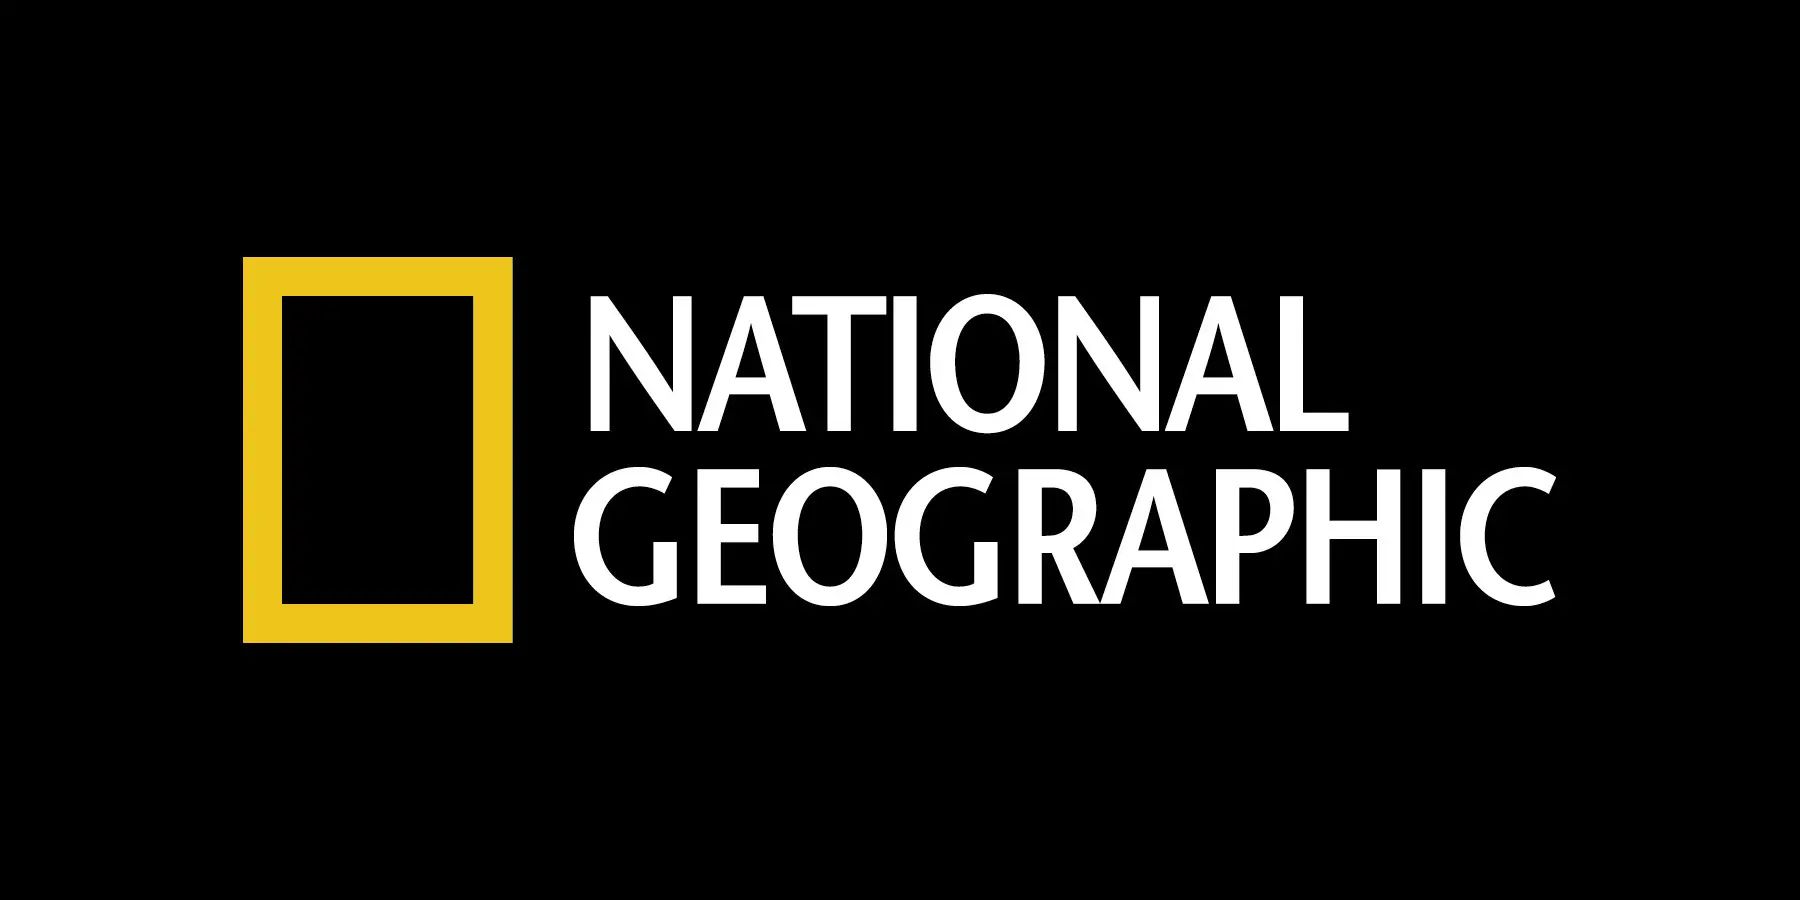 17-intriguing-facts-about-national-geographic